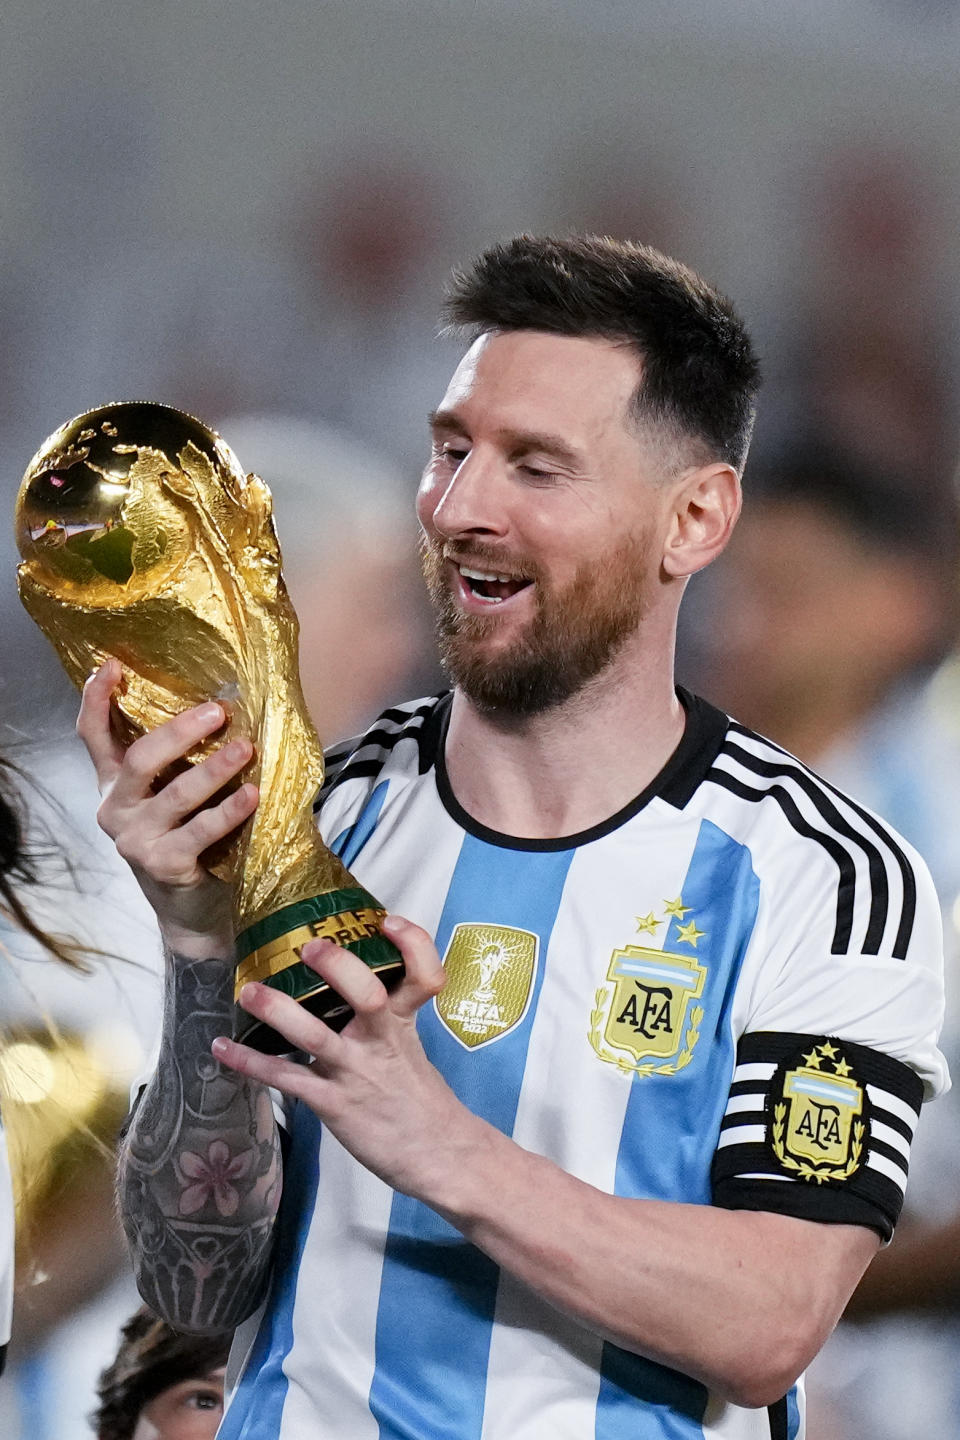 Argentina's Lionel Messi holds the FIFA World Cup trophy during a celebration ceremony for local fans after an international friendly soccer match against Panama at the Monumental stadium in Buenos Aires, Argentina, Thursday, March 23, 2023. (AP Photo/Natacha Pisarenko)